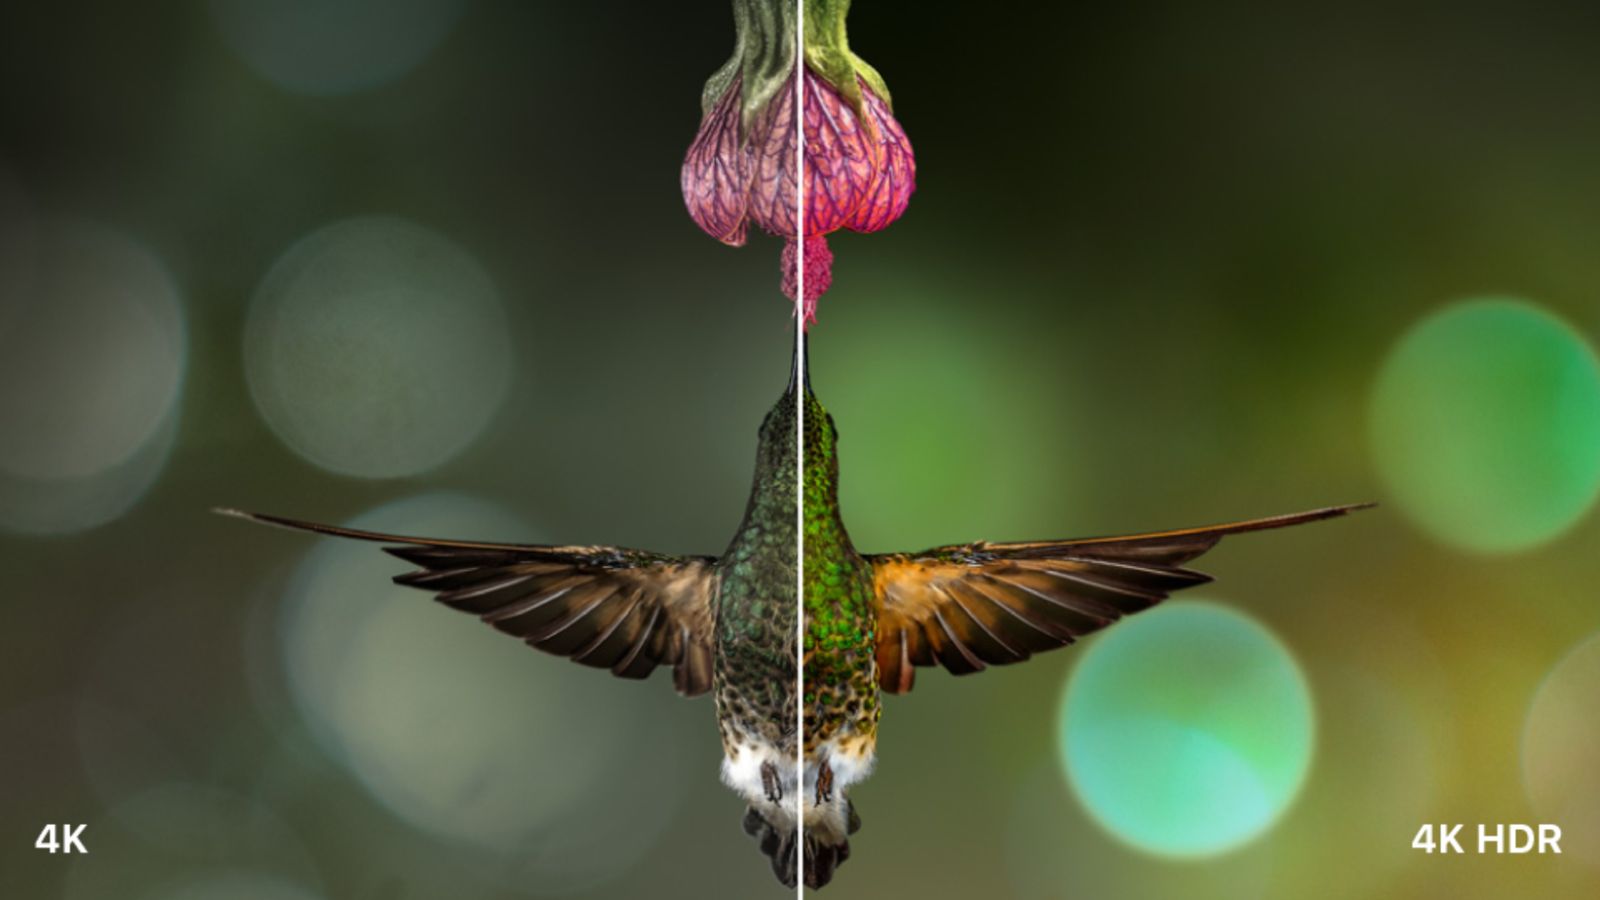 Image of a bird eating from a pink flower shown in 4K and 4K HDR.